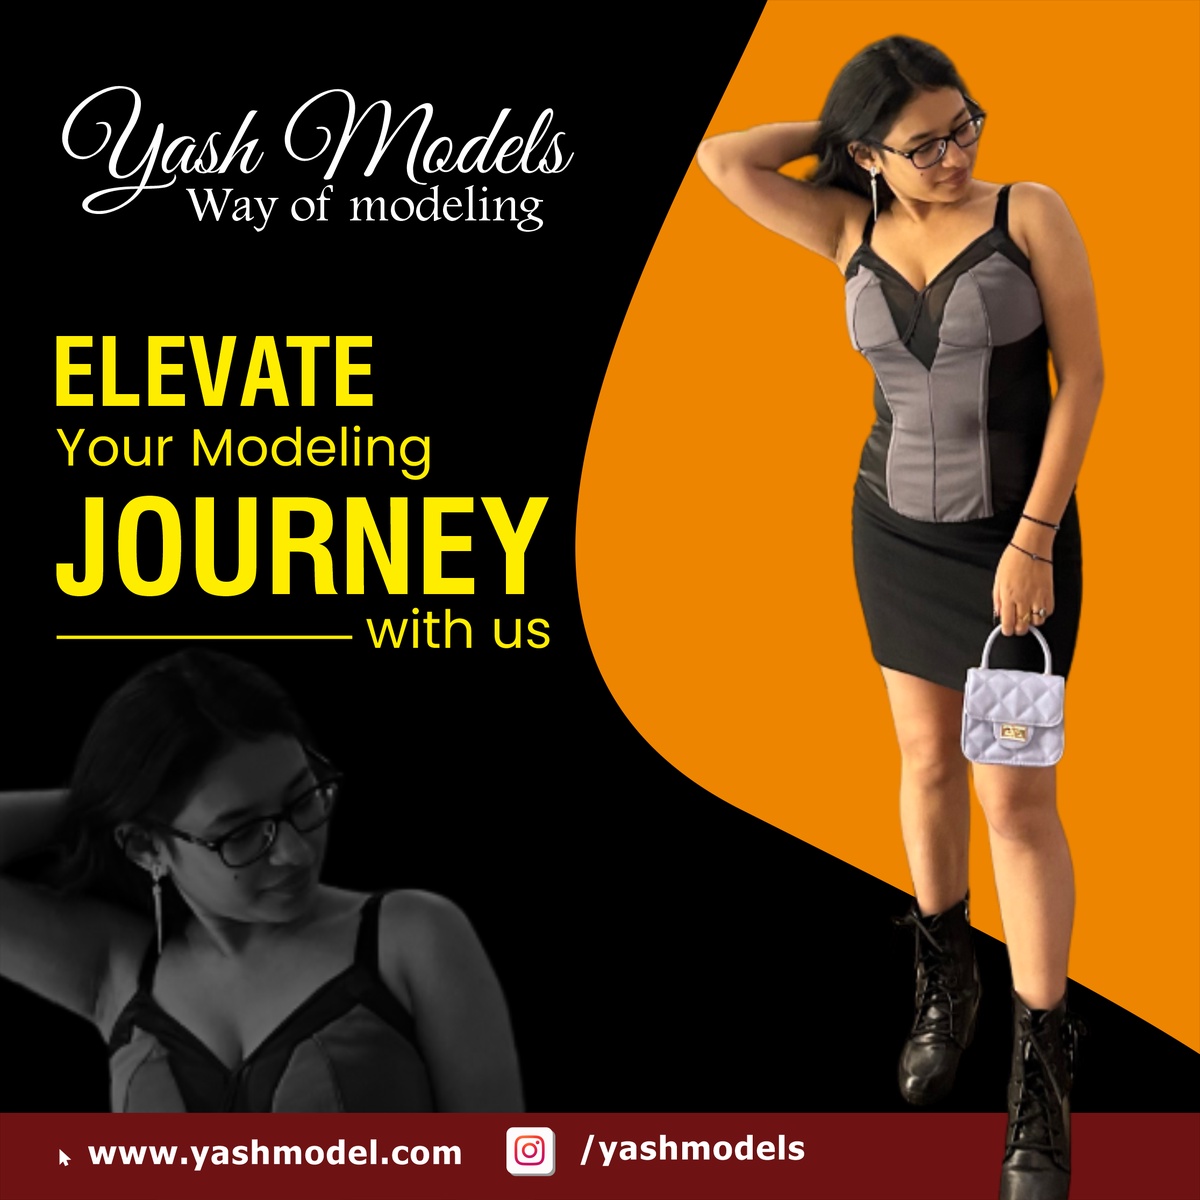 The Ultimate Guide to Modelling in Ranchi